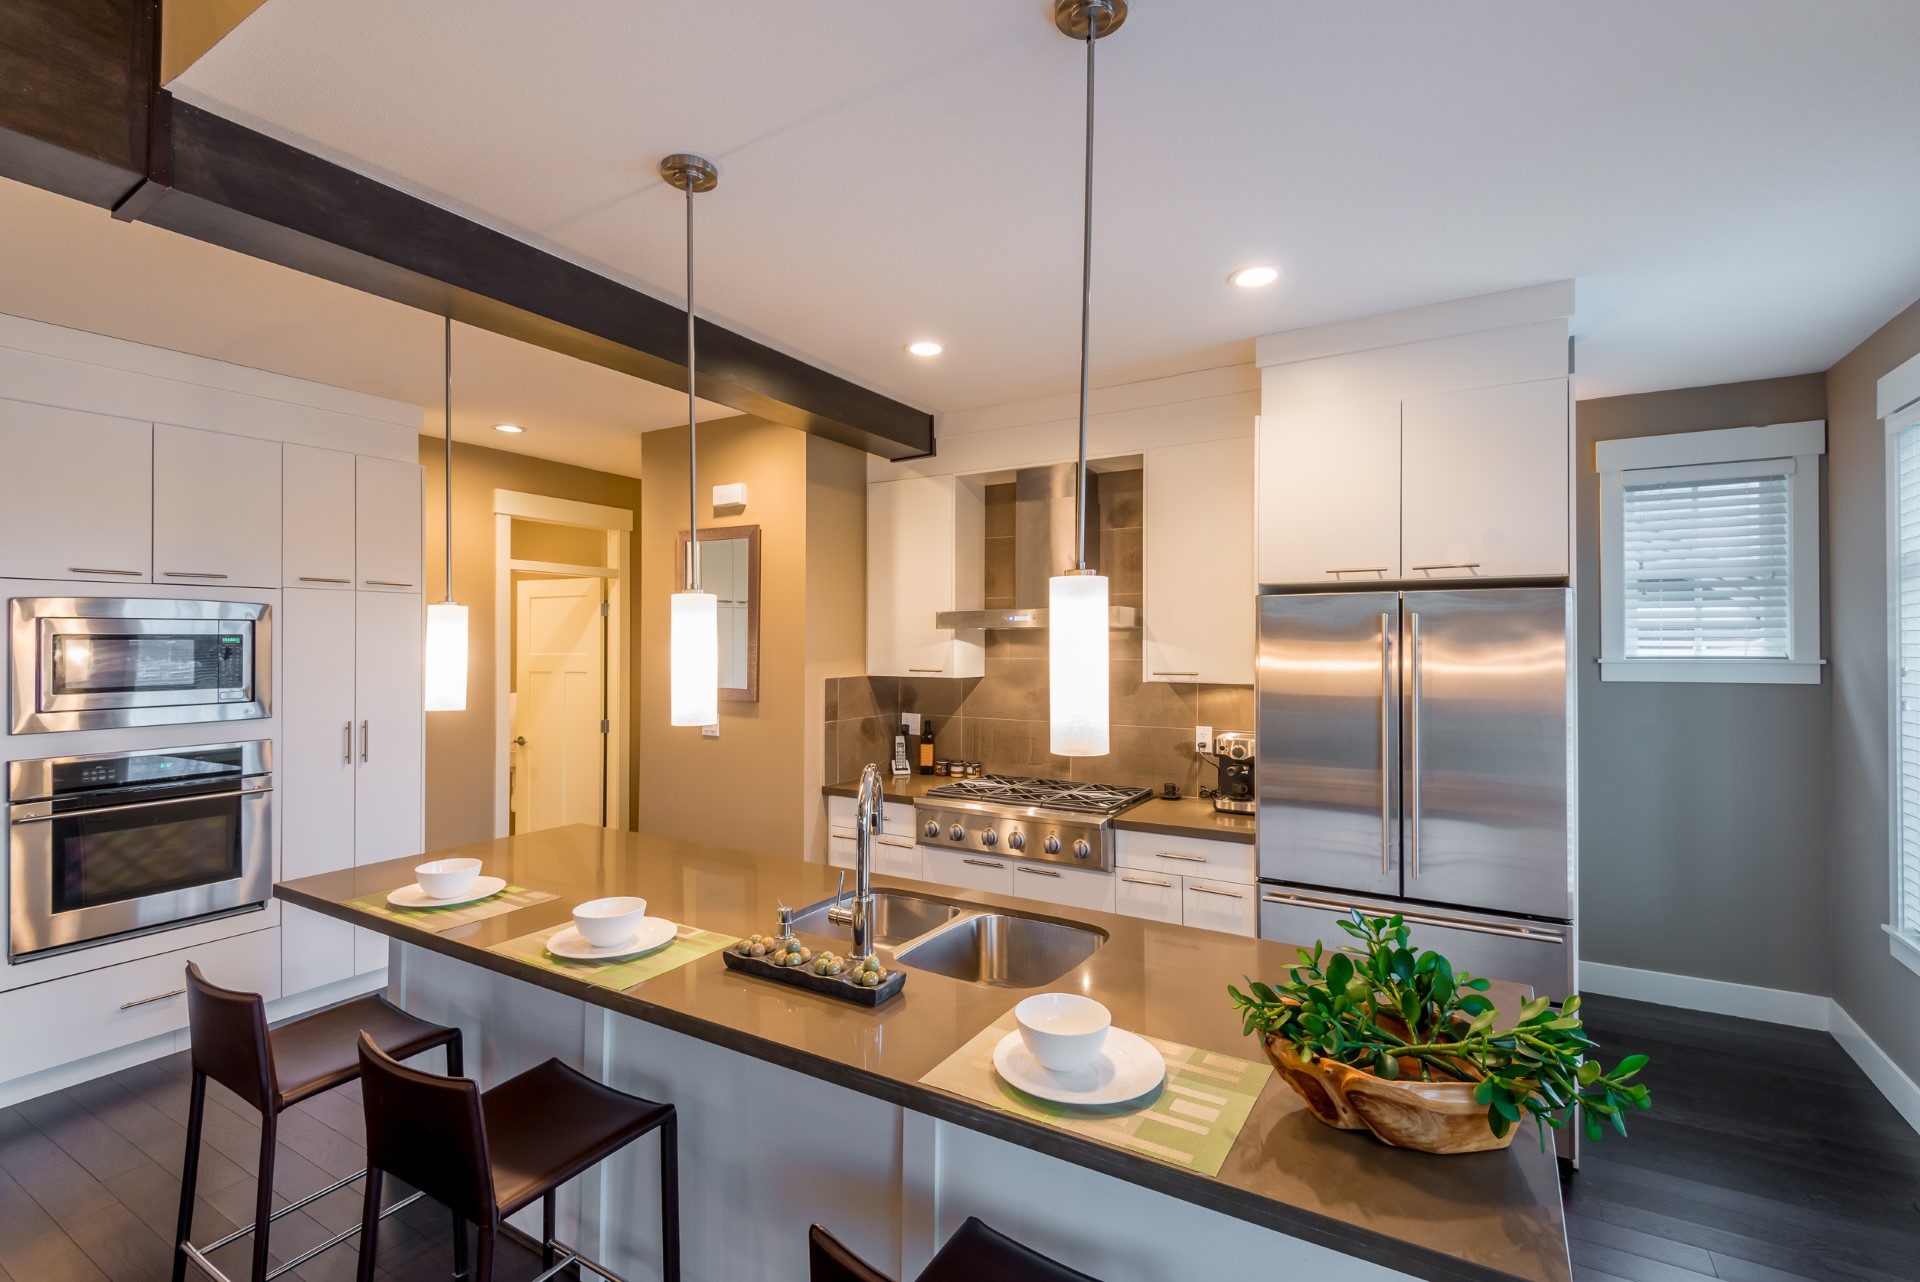 Definitely a very hard color set up to conquer, this tri-color paint job if done properly can make a kitchen stand out like no other. Updated with all the modern stainless steel appliances, this kitchen is a fantastic decoration that makes it home.